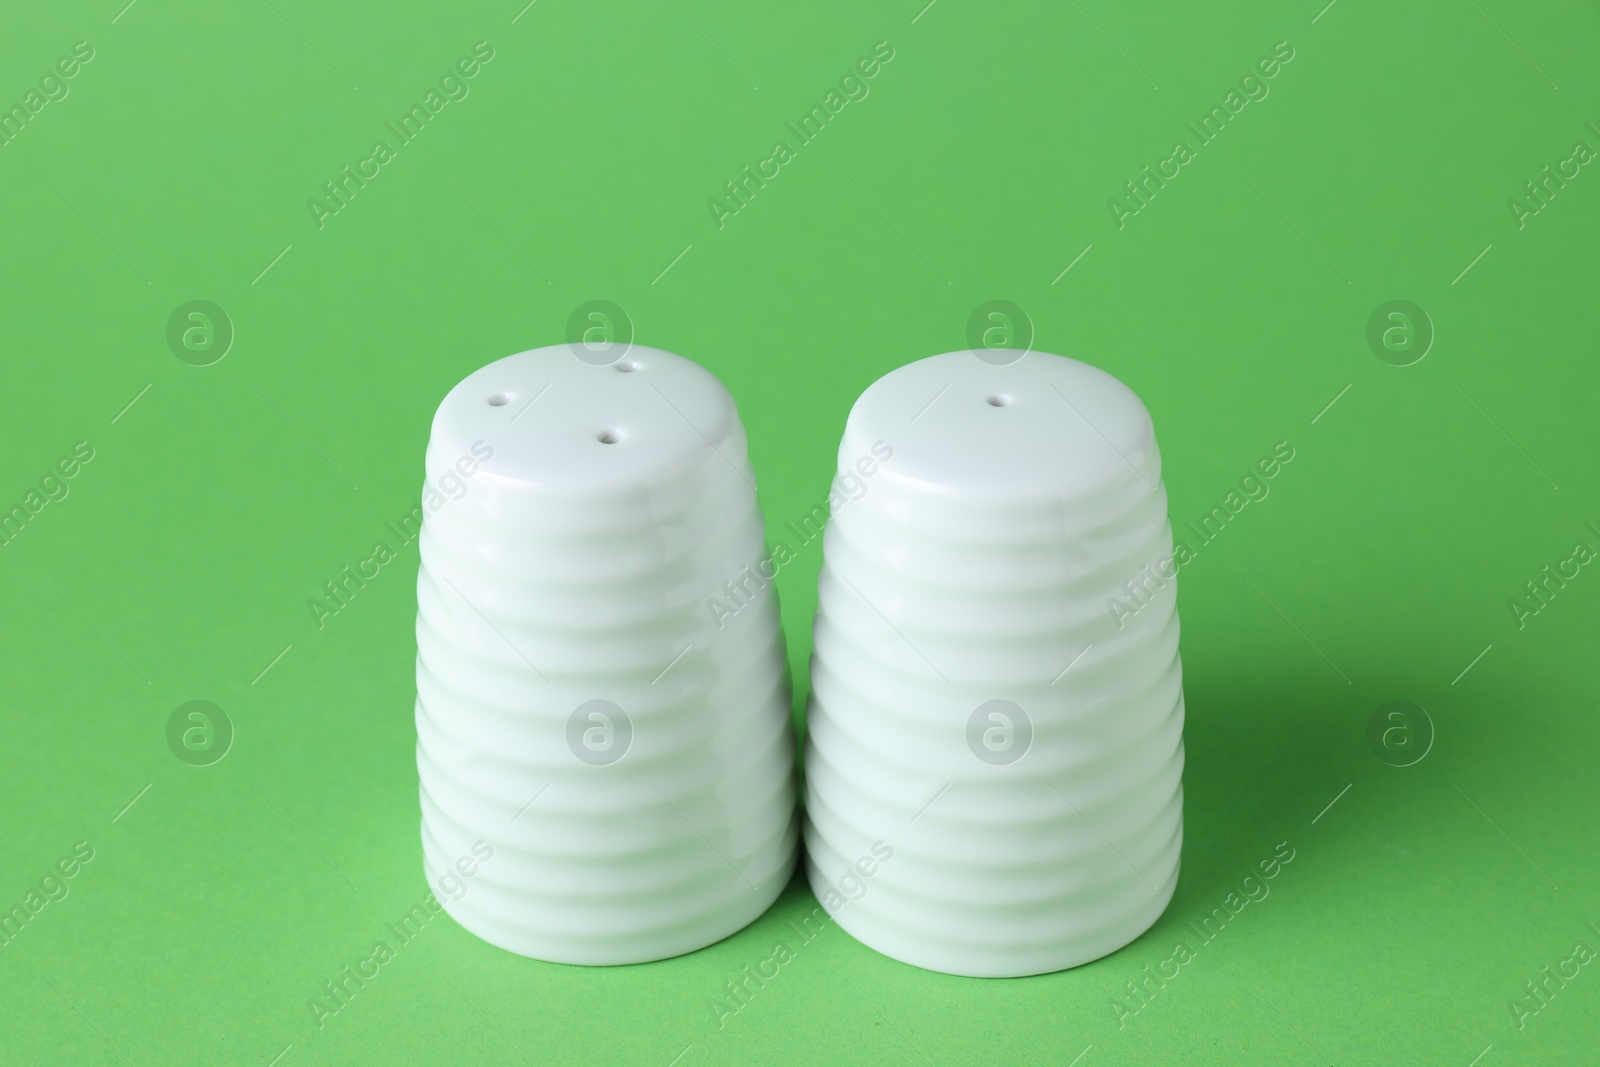 Photo of Salt and pepper shakers on green background, closeup